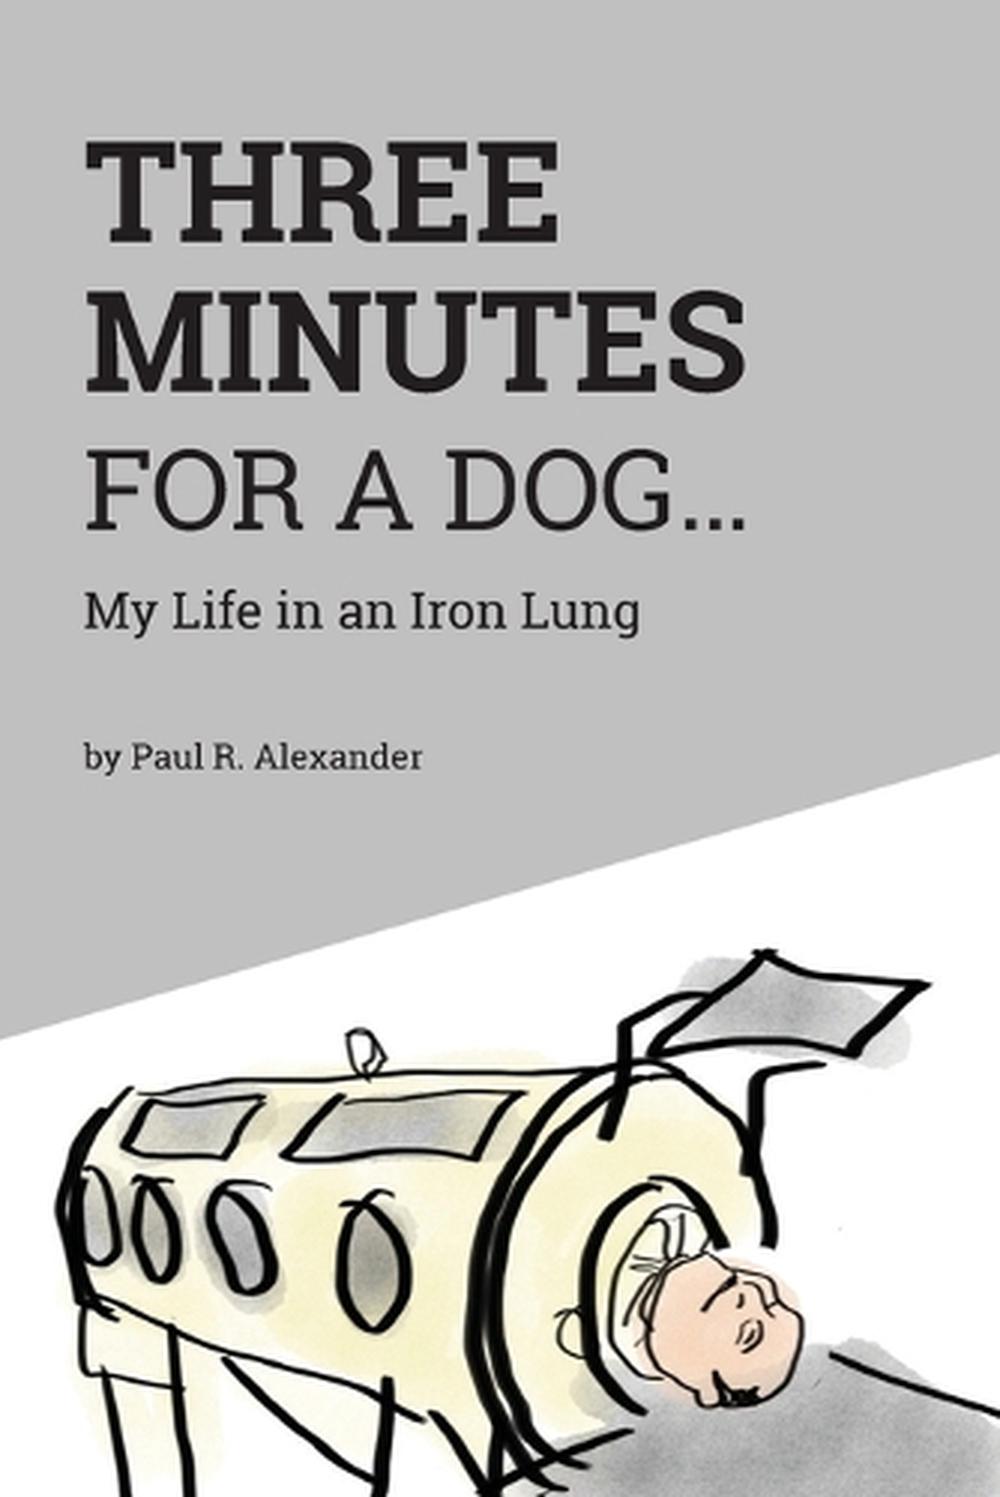 Three Minutes for a Dog: My Life in an Iron Lung _by Paul Alexander ...